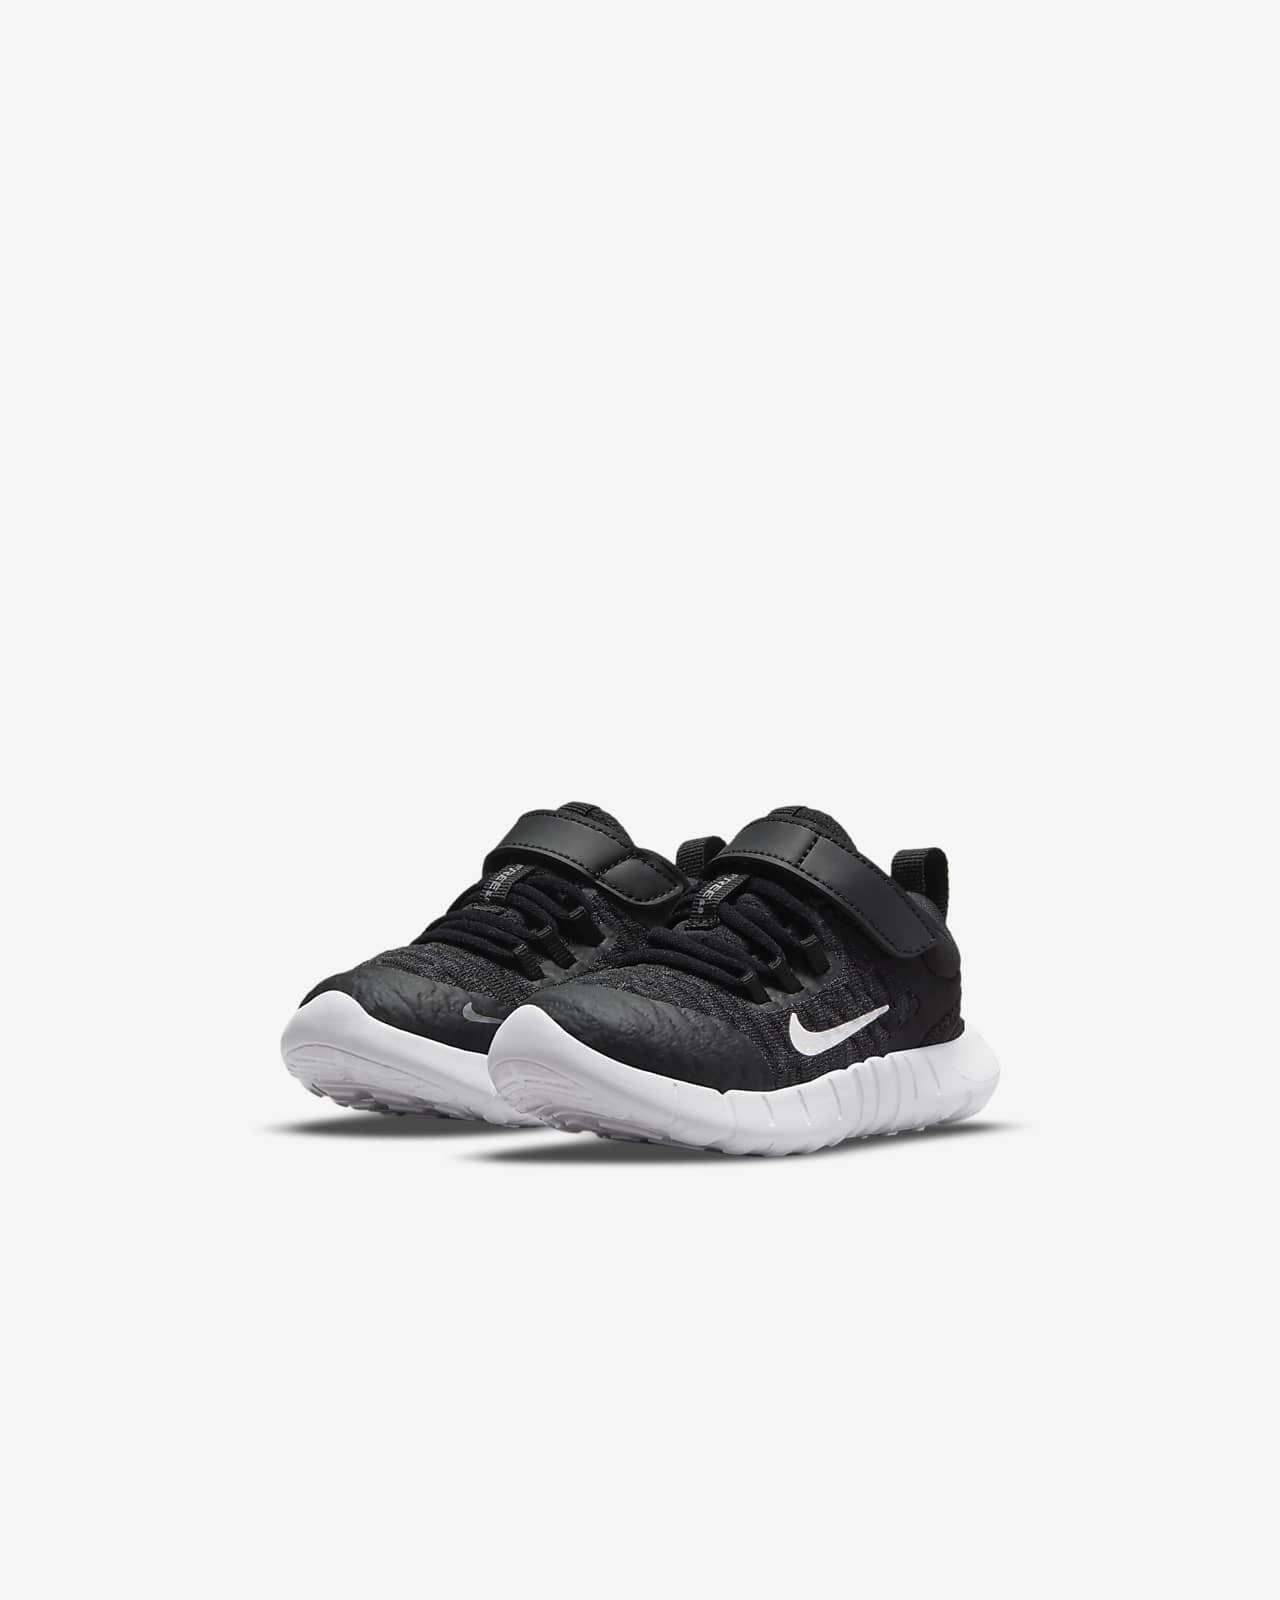 Nike Free RN 2021 Baby/Toddler Shoes in Black, Size: 5C | CZ3997-001